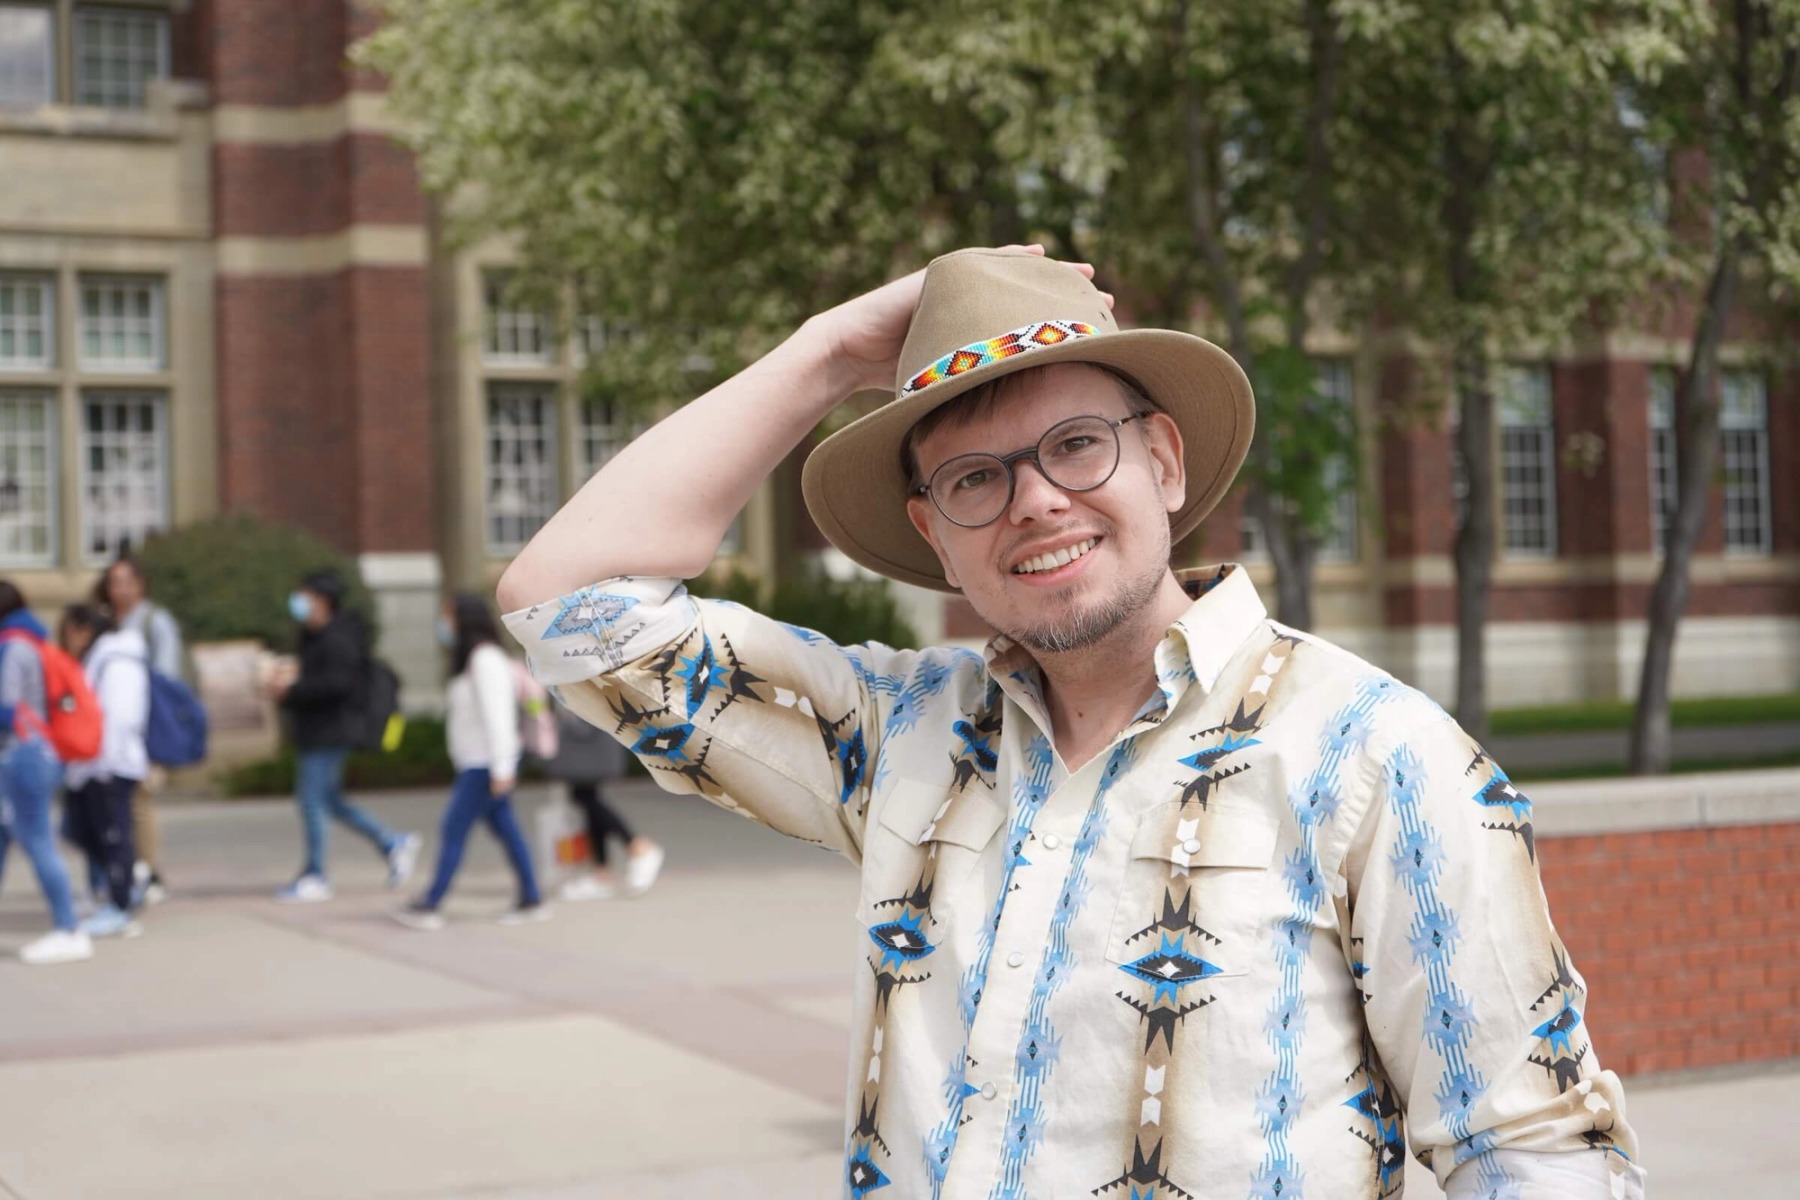 A young man in rounded glasses and a patterned shirt and hat poses outside a school.